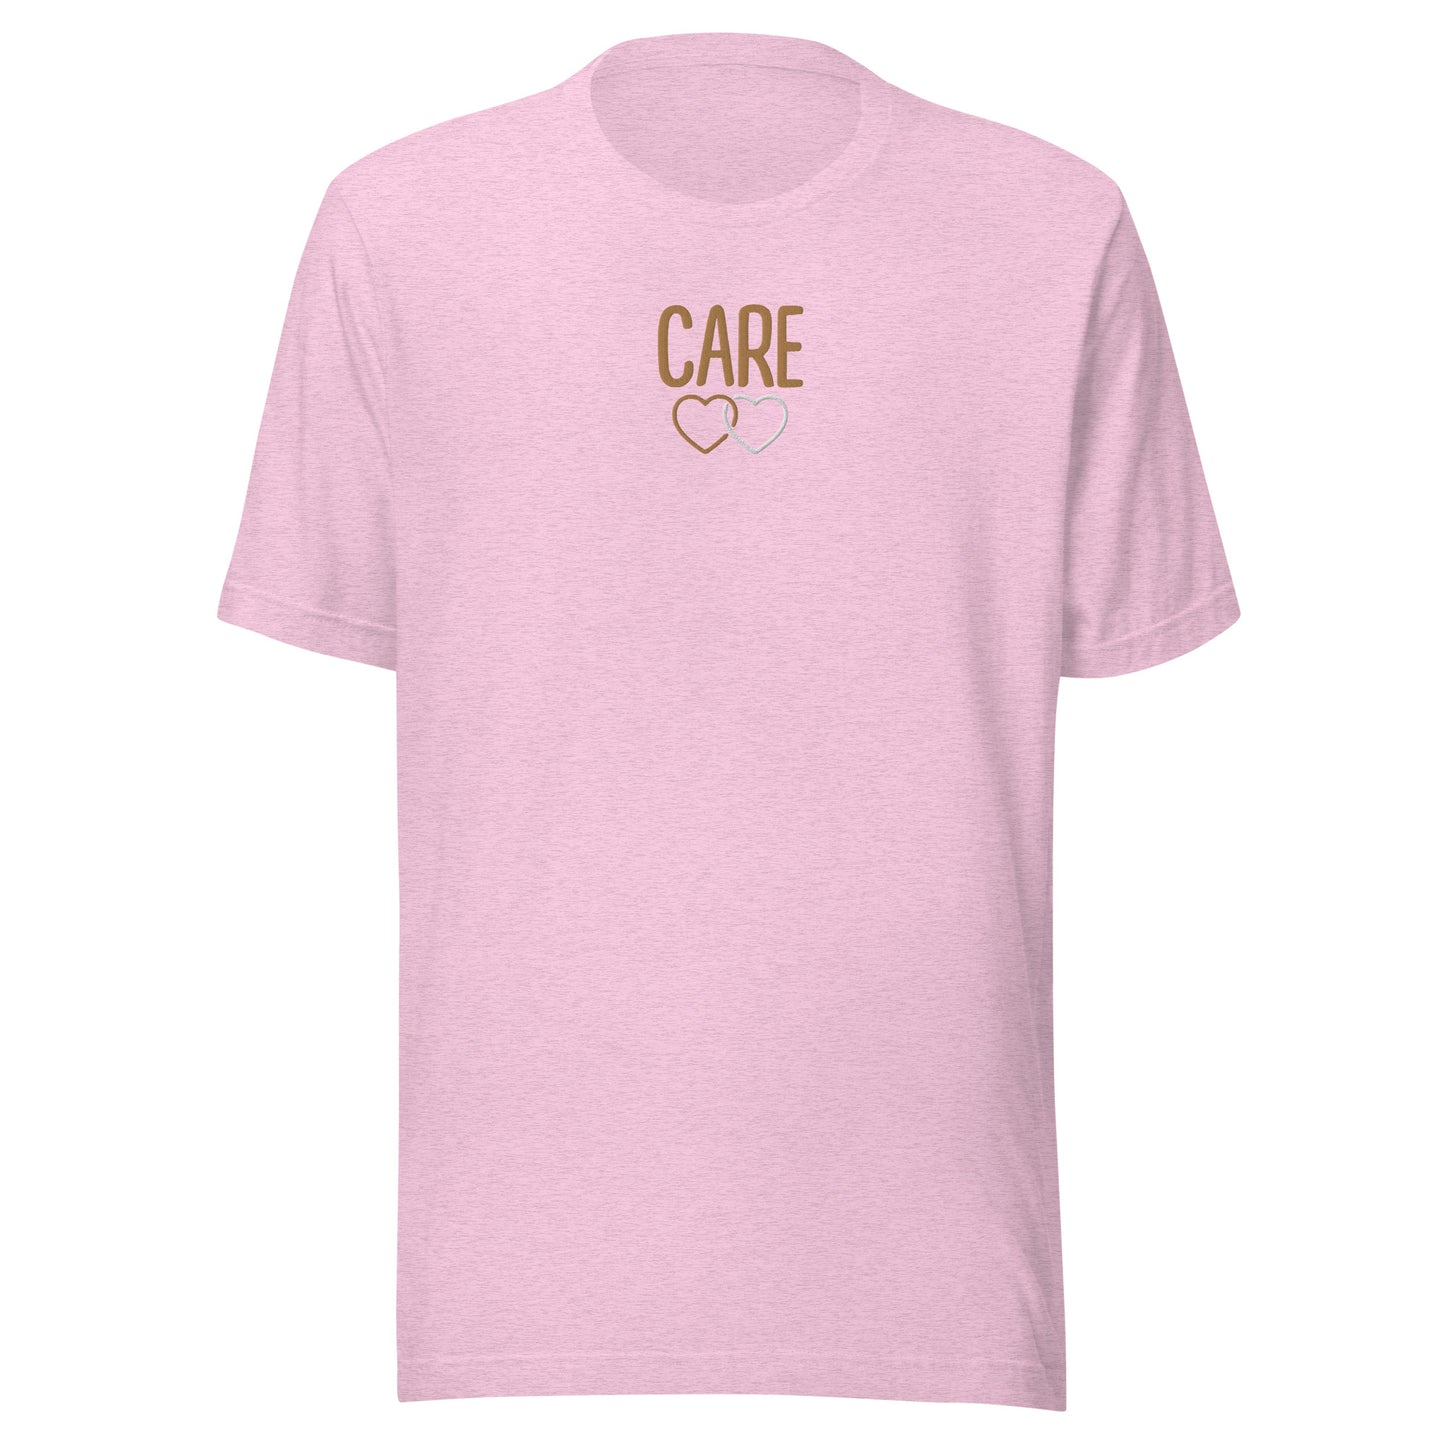 ONE Unisex Care T-Shirt (Traditional)